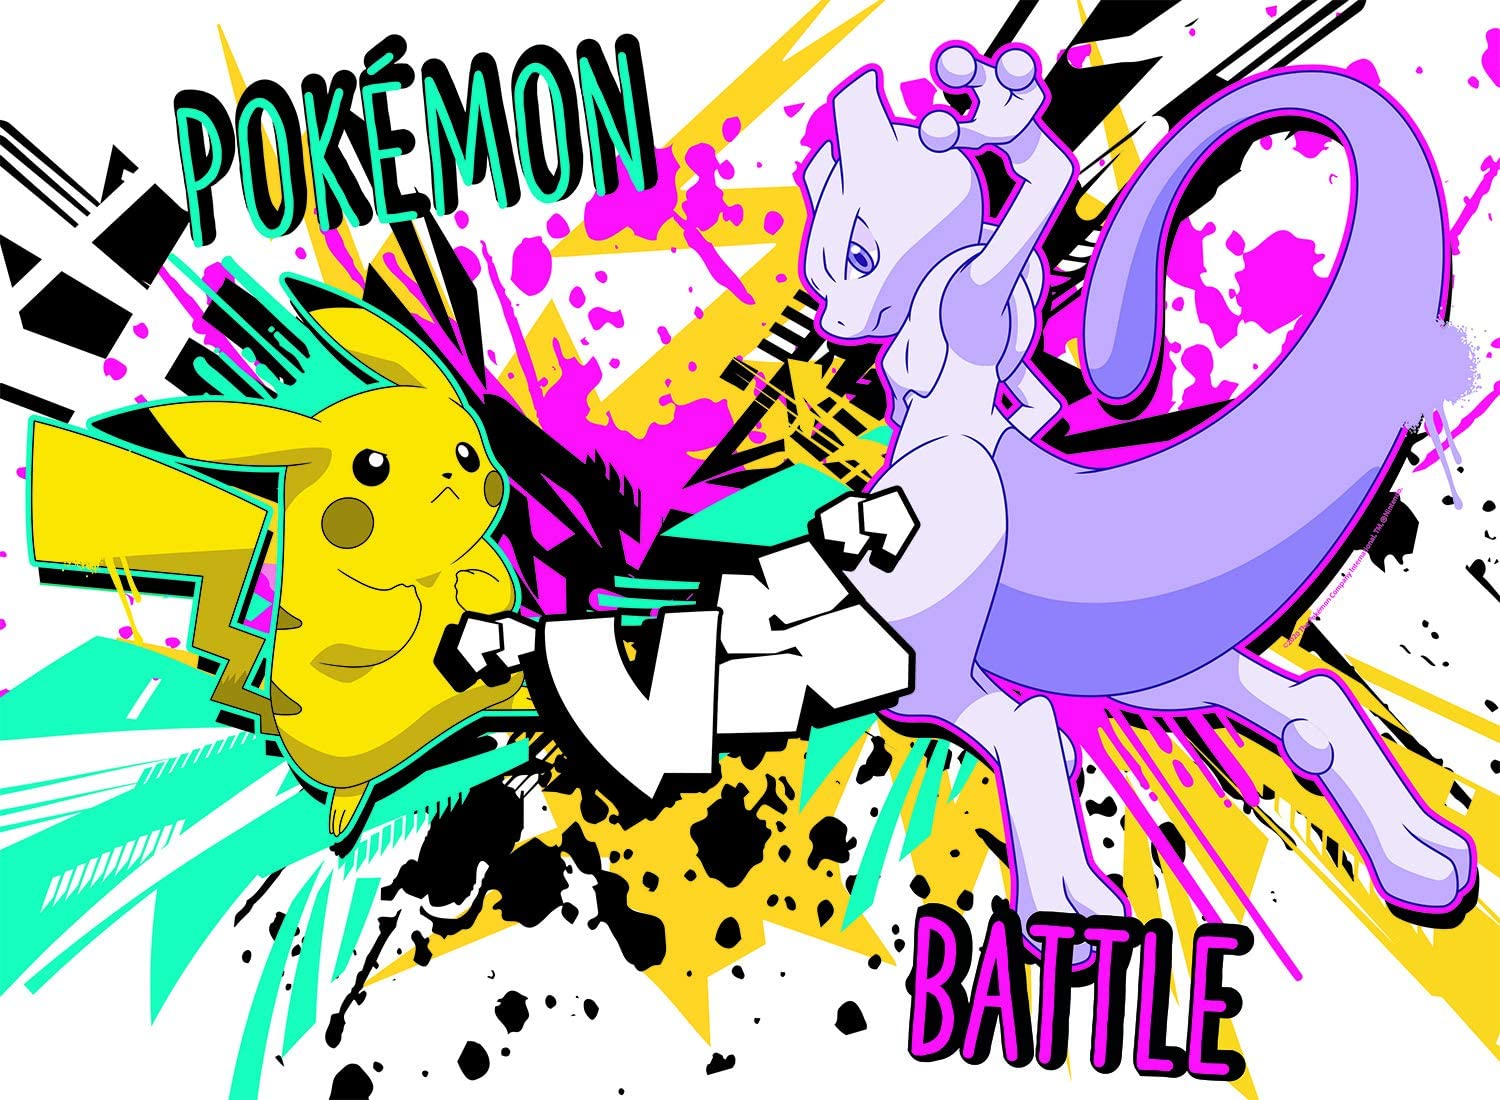 Pokemon - Pikachu vs. Mewtwo - Scratch and Dent Video Game Jigsaw Puzzle